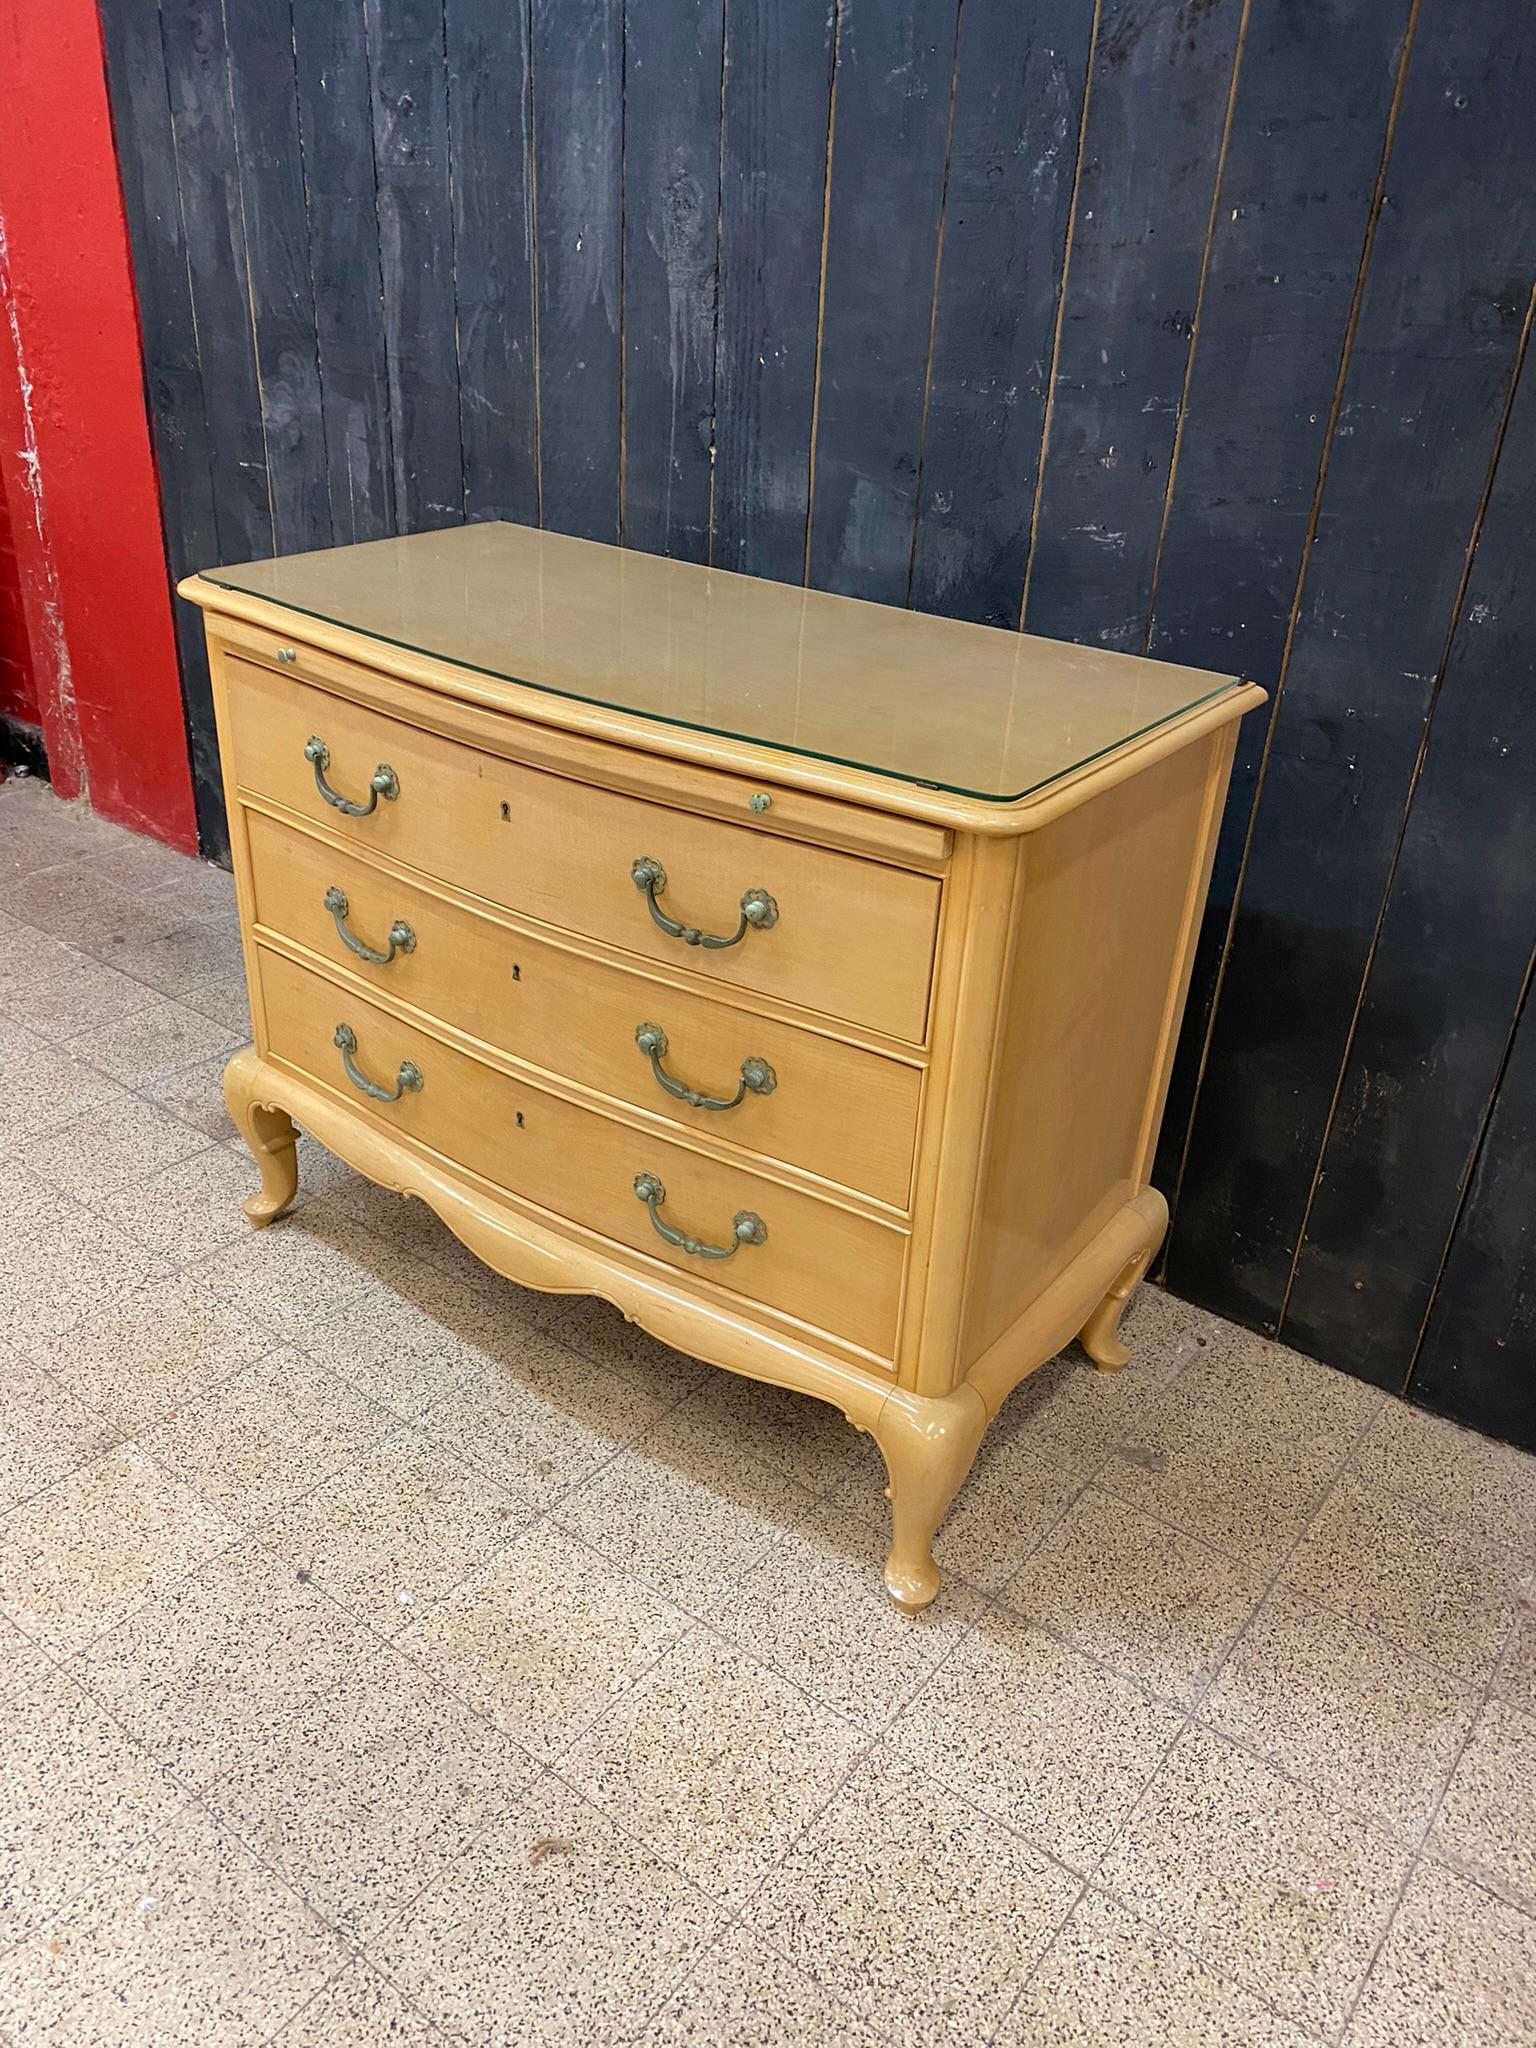 Mid-20th Century Neo-Classical Chest of Drawers in Sycamore and Patinated Bronze, circa 1940/1950 For Sale